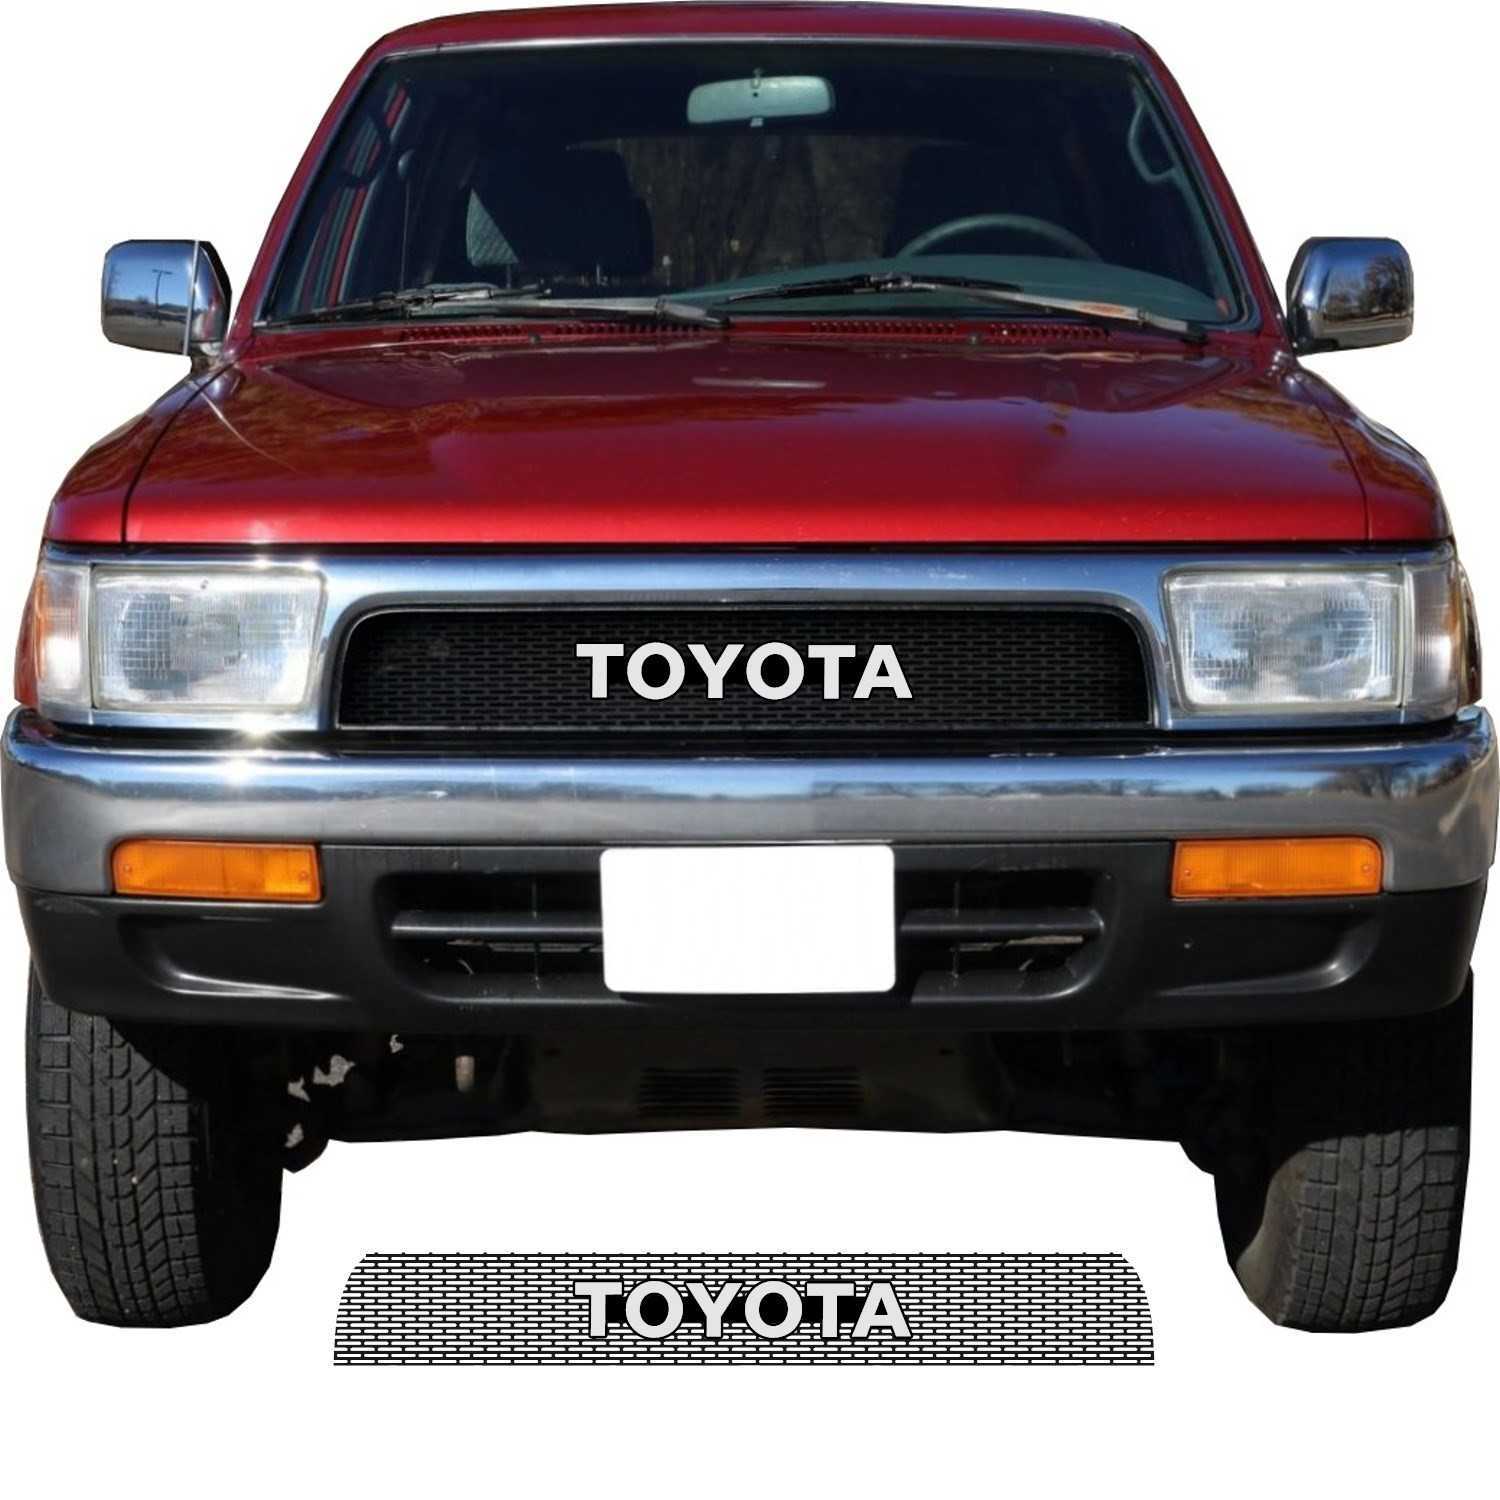 1992 - 1995 Toyota 4Runner Grill Mesh With Toyota Emblem